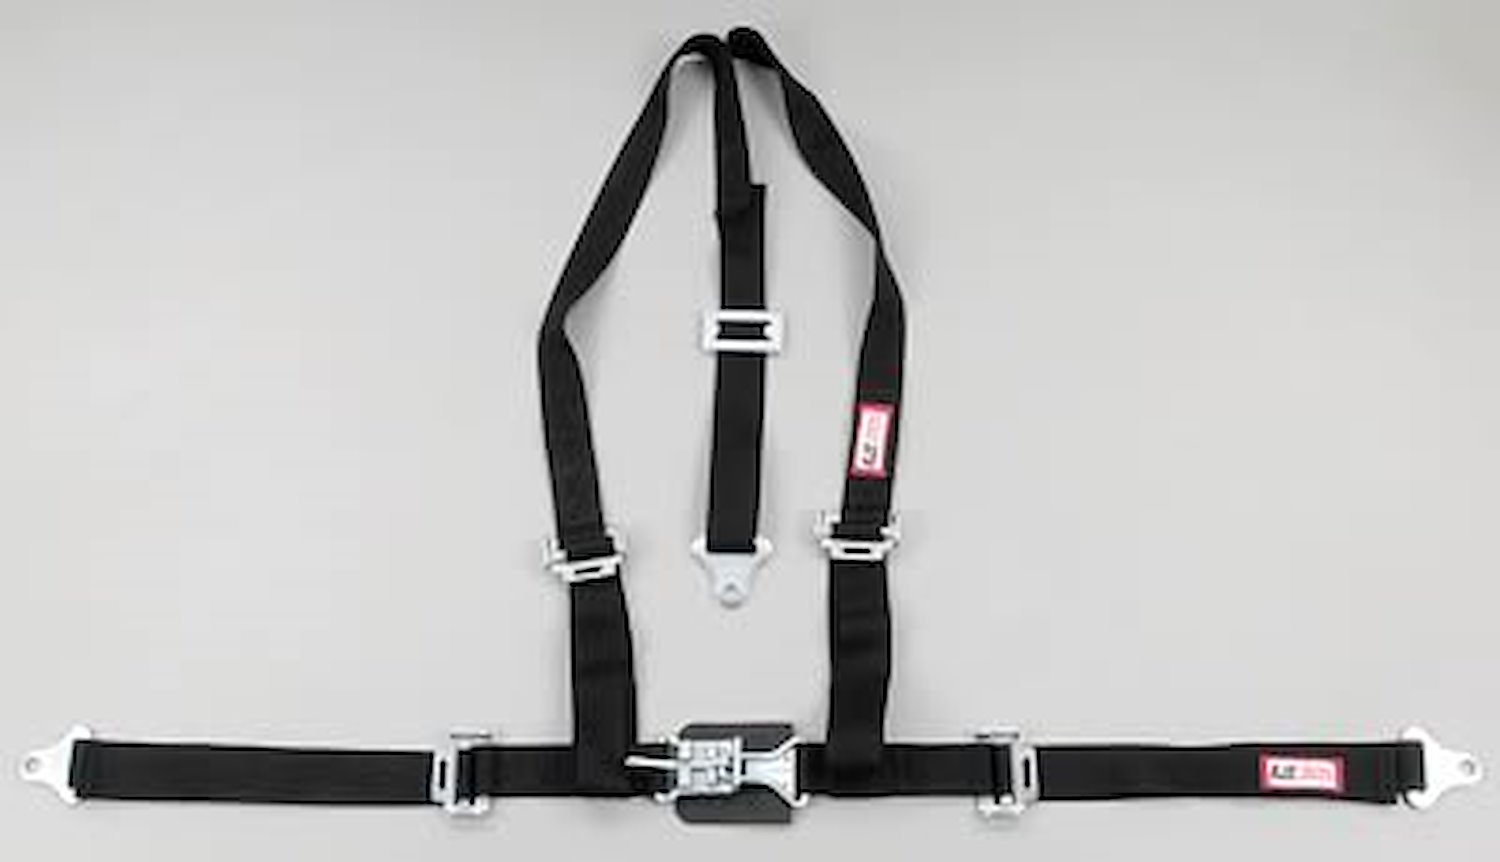 NON-SFI L&L HARNESS 2 PULL DOWN Lap Belt BOLT SEWN IN 2 S.H. Y FLOOR Mount WRAP/BOLT RED